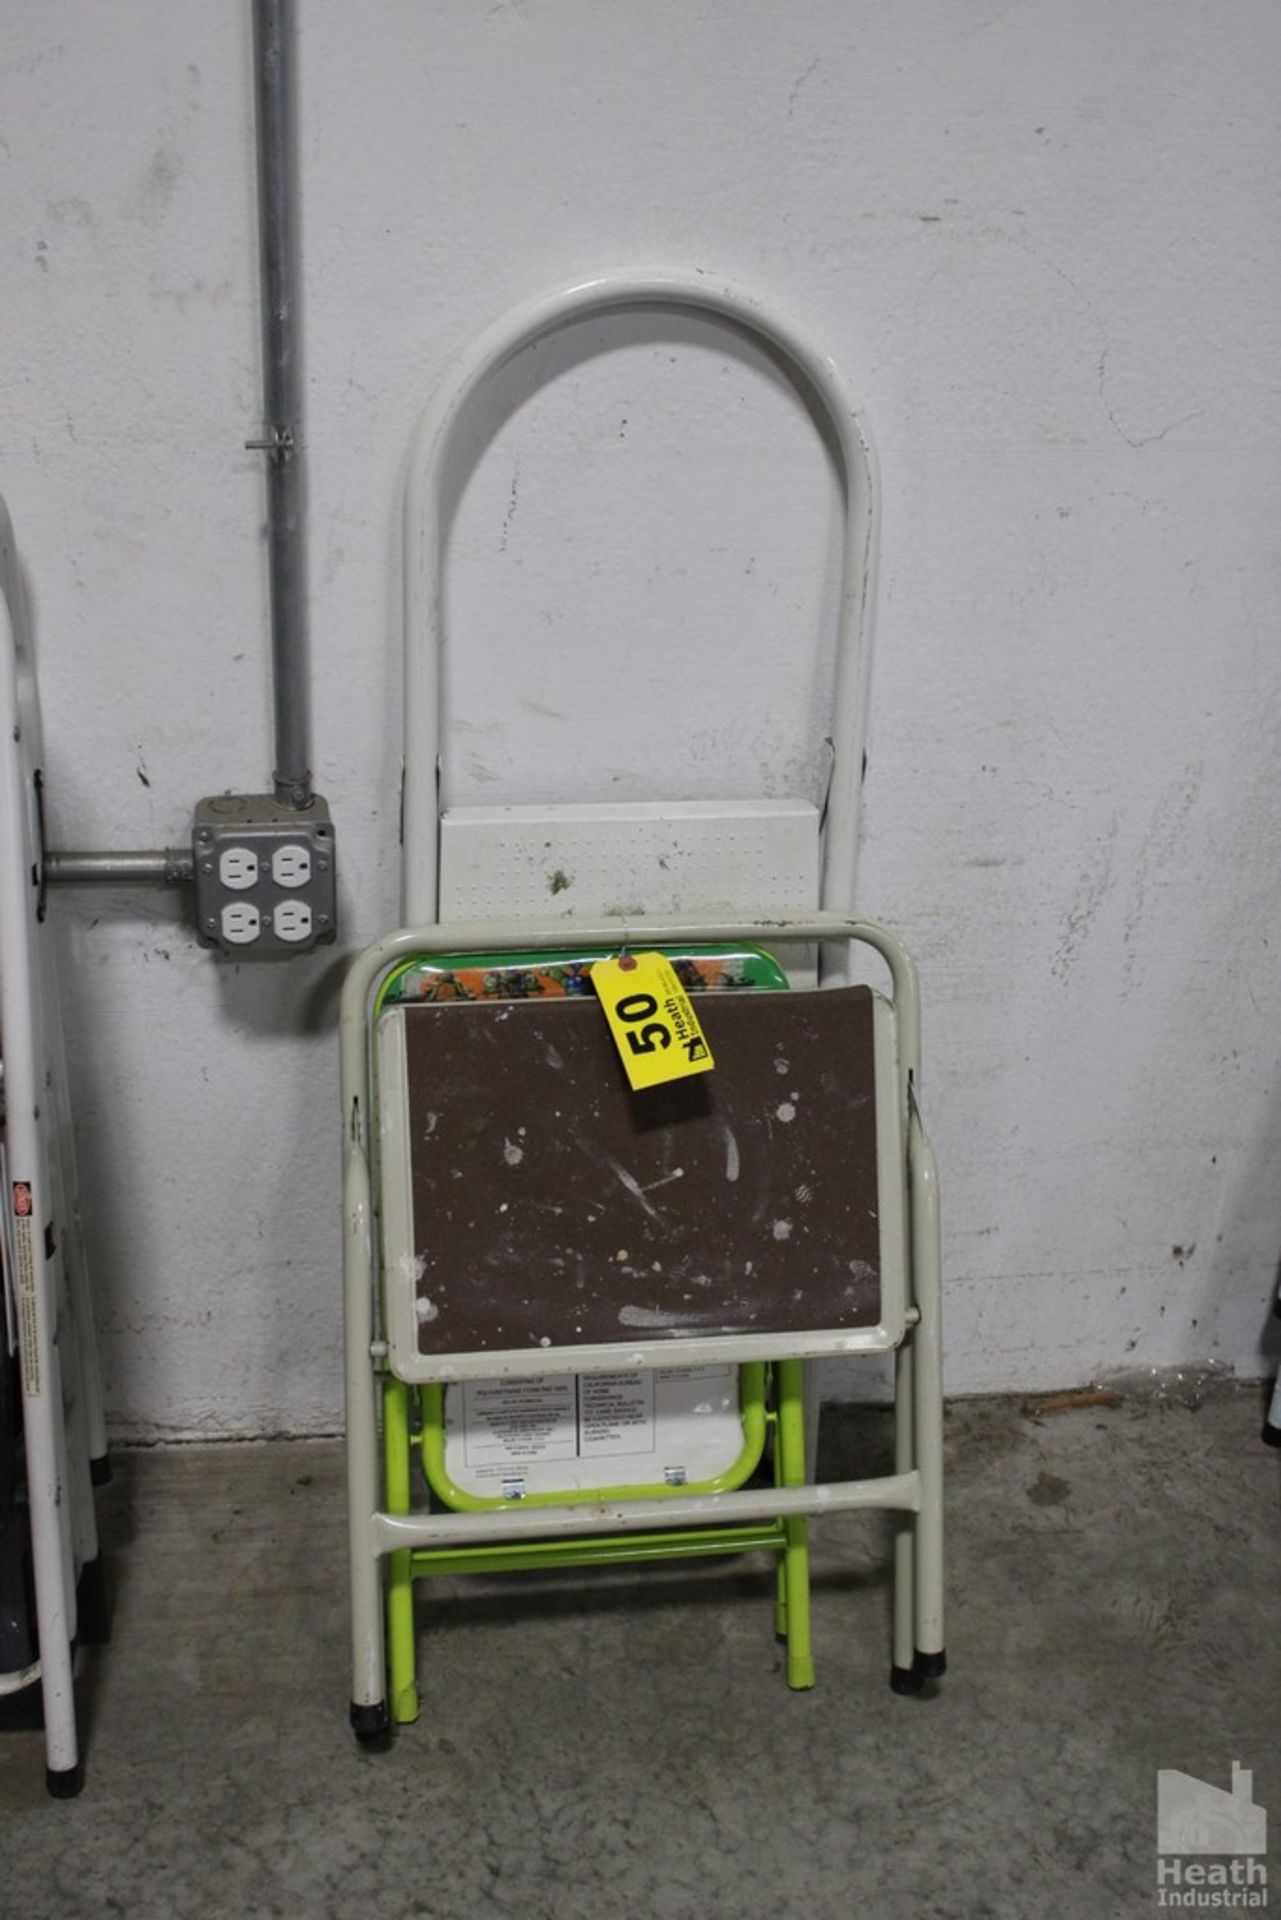 (3) ASSORTED TWO STEP LADDERS